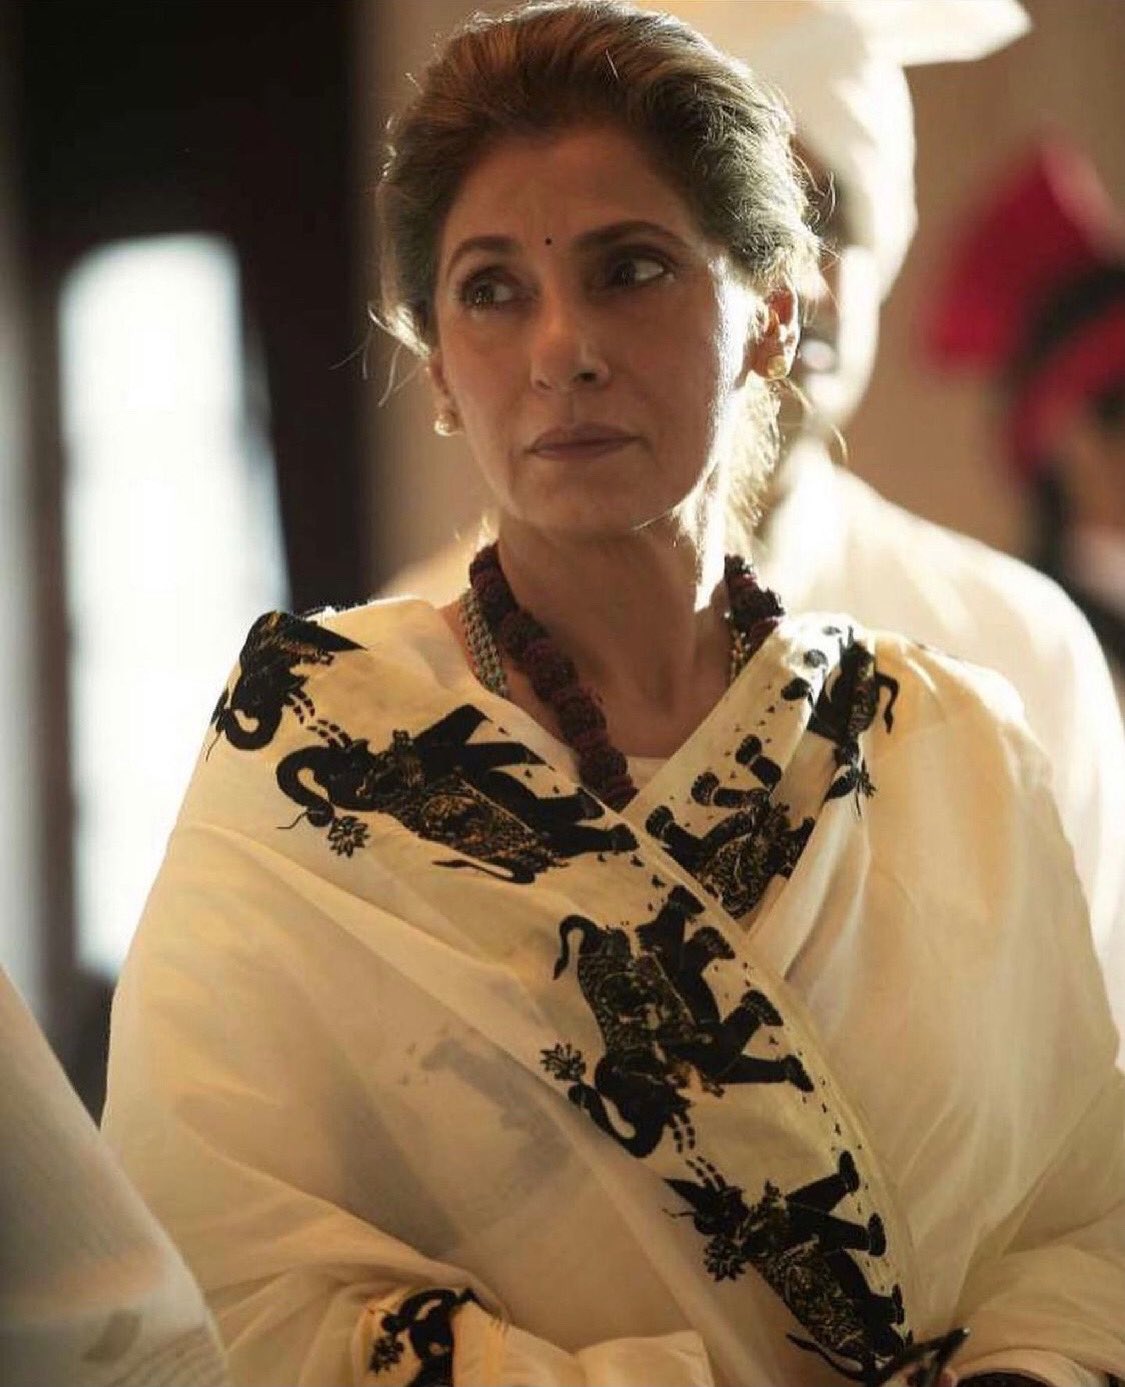 The veteran actress DIMPLE KAPADIA
Celebrates her 64th birthday today. We wish her a great HAPPY BIRTHDAY ! 